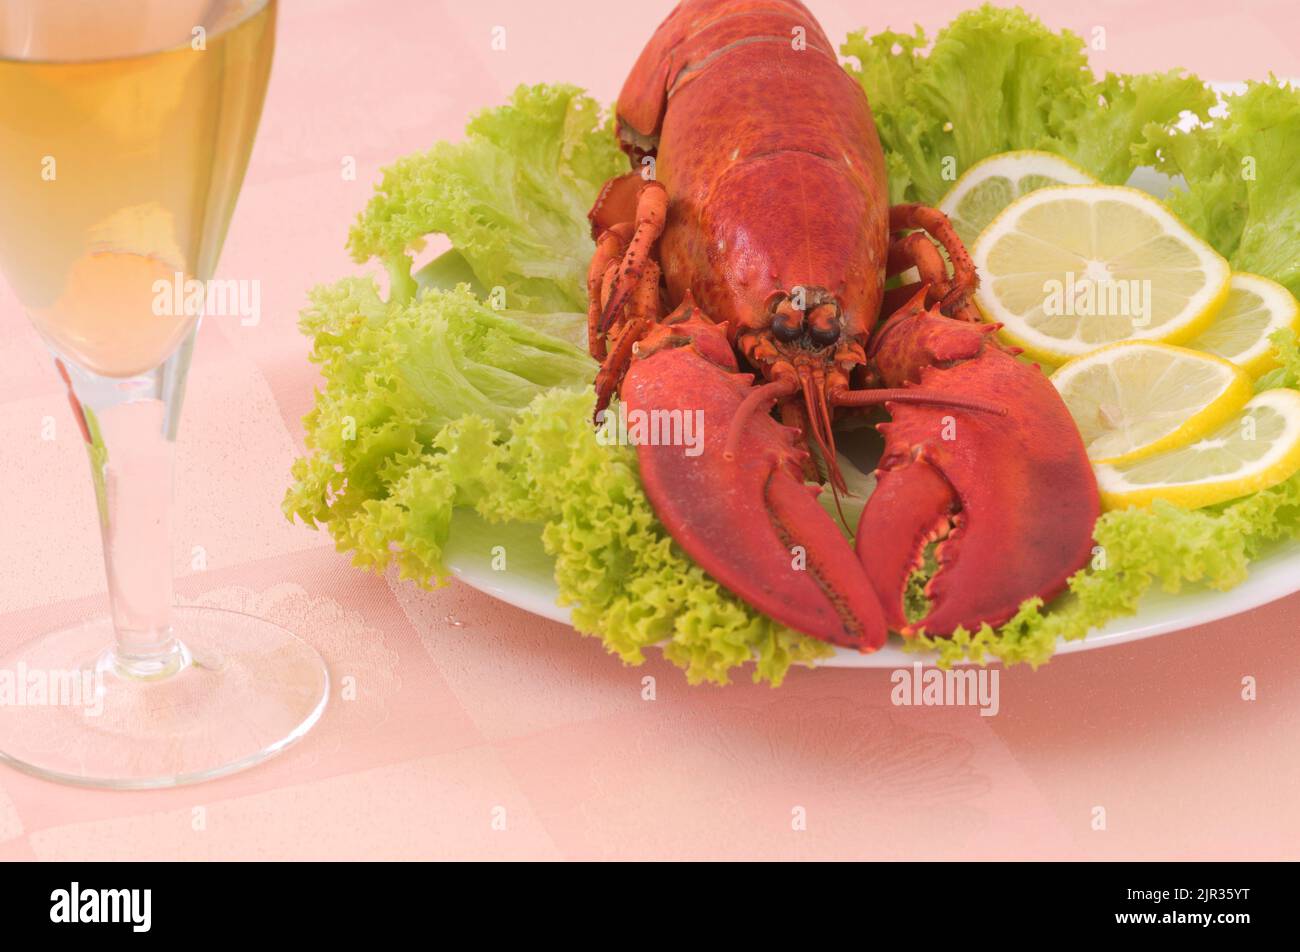 Boiled lobster on a plate with lemon, lettuce, and a glass of white wine Stock Photo